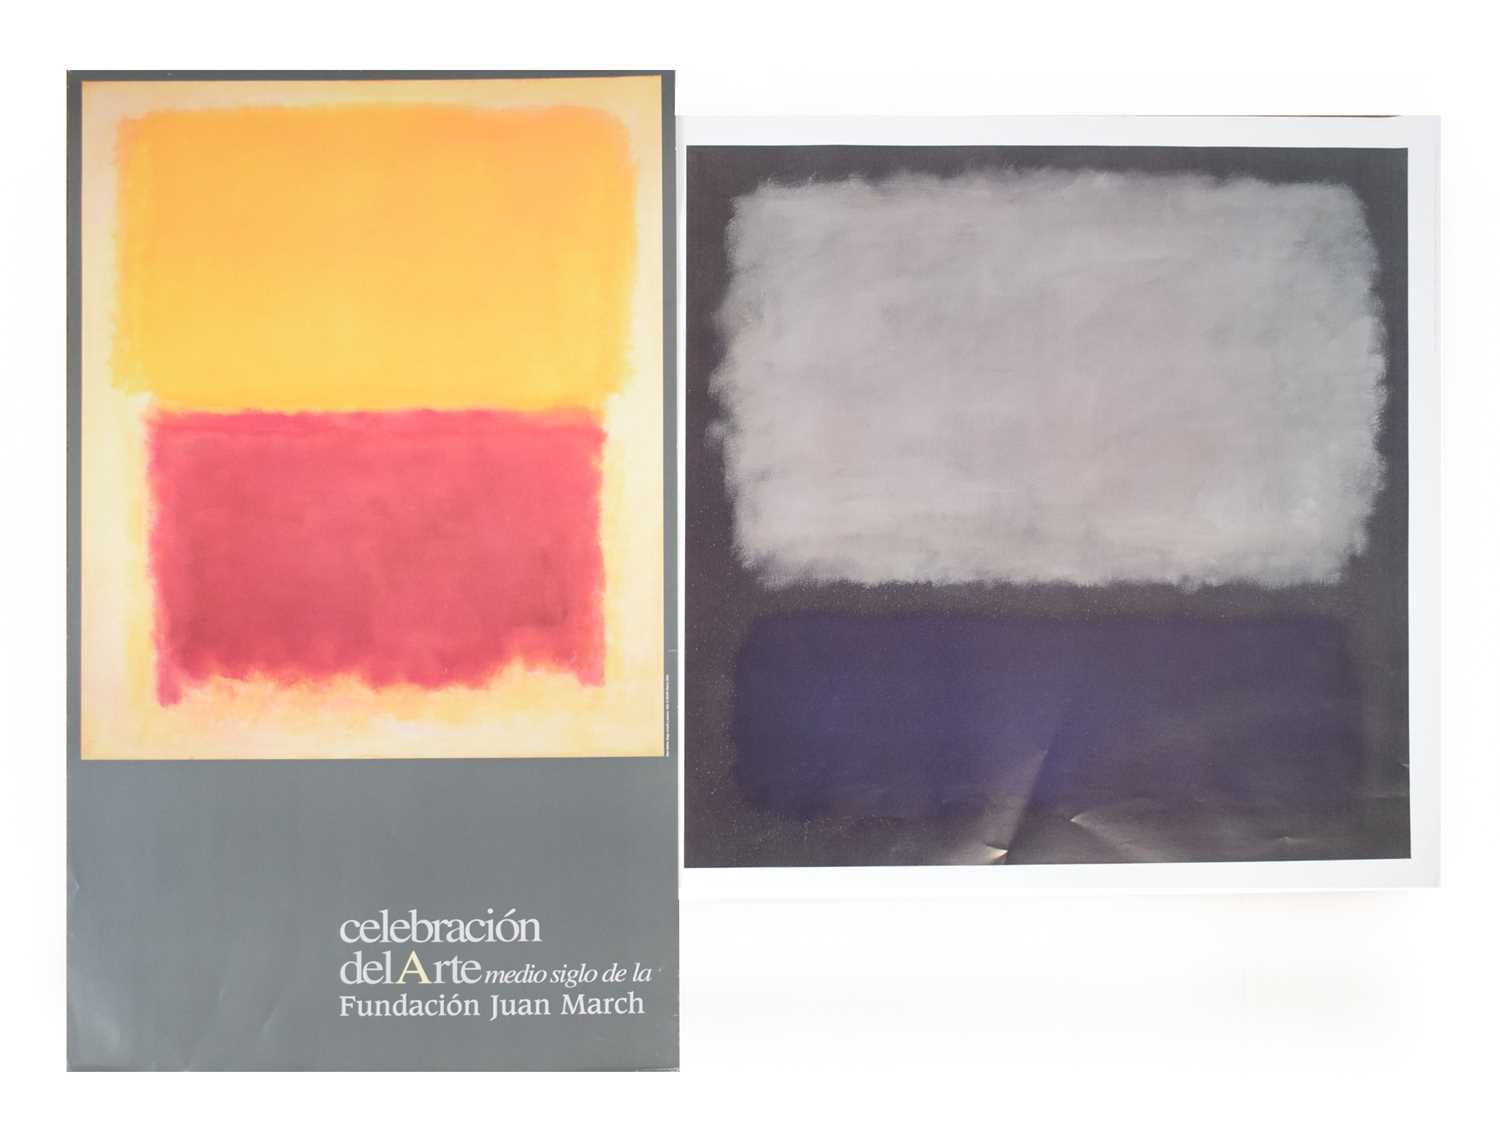 After Mark Rothko, 'Celebration D'Art', exhibition poster, 38 x 21 inches, together with 'Blue and